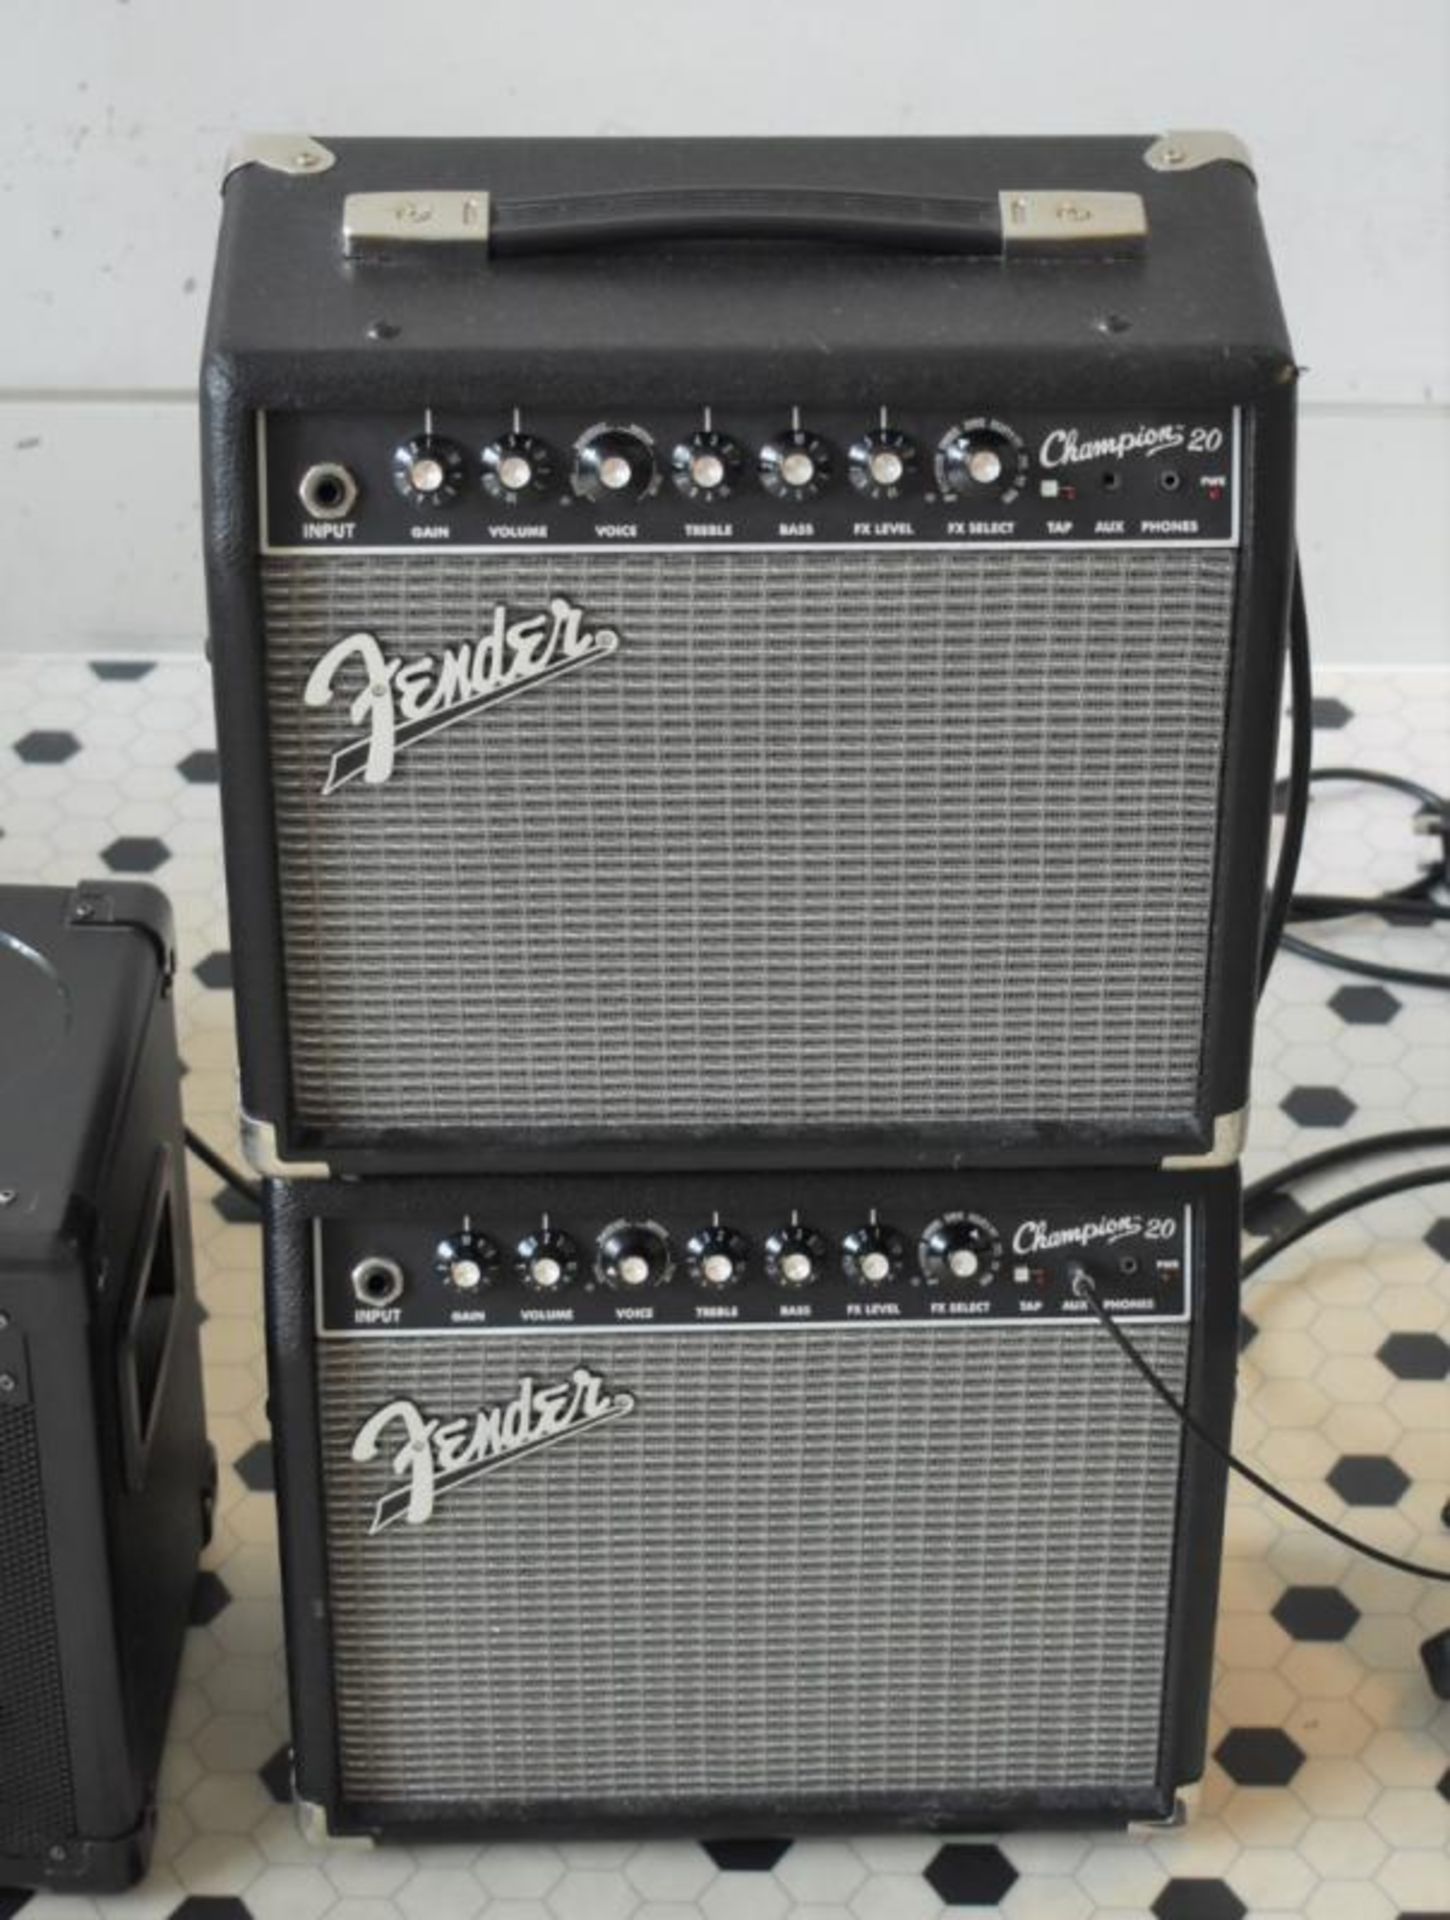 2 x Fender Champion 20 Guitar Amplifiers - Small Compact Practice Amps, Ideal For Beginners - RRP £2 - Image 2 of 3